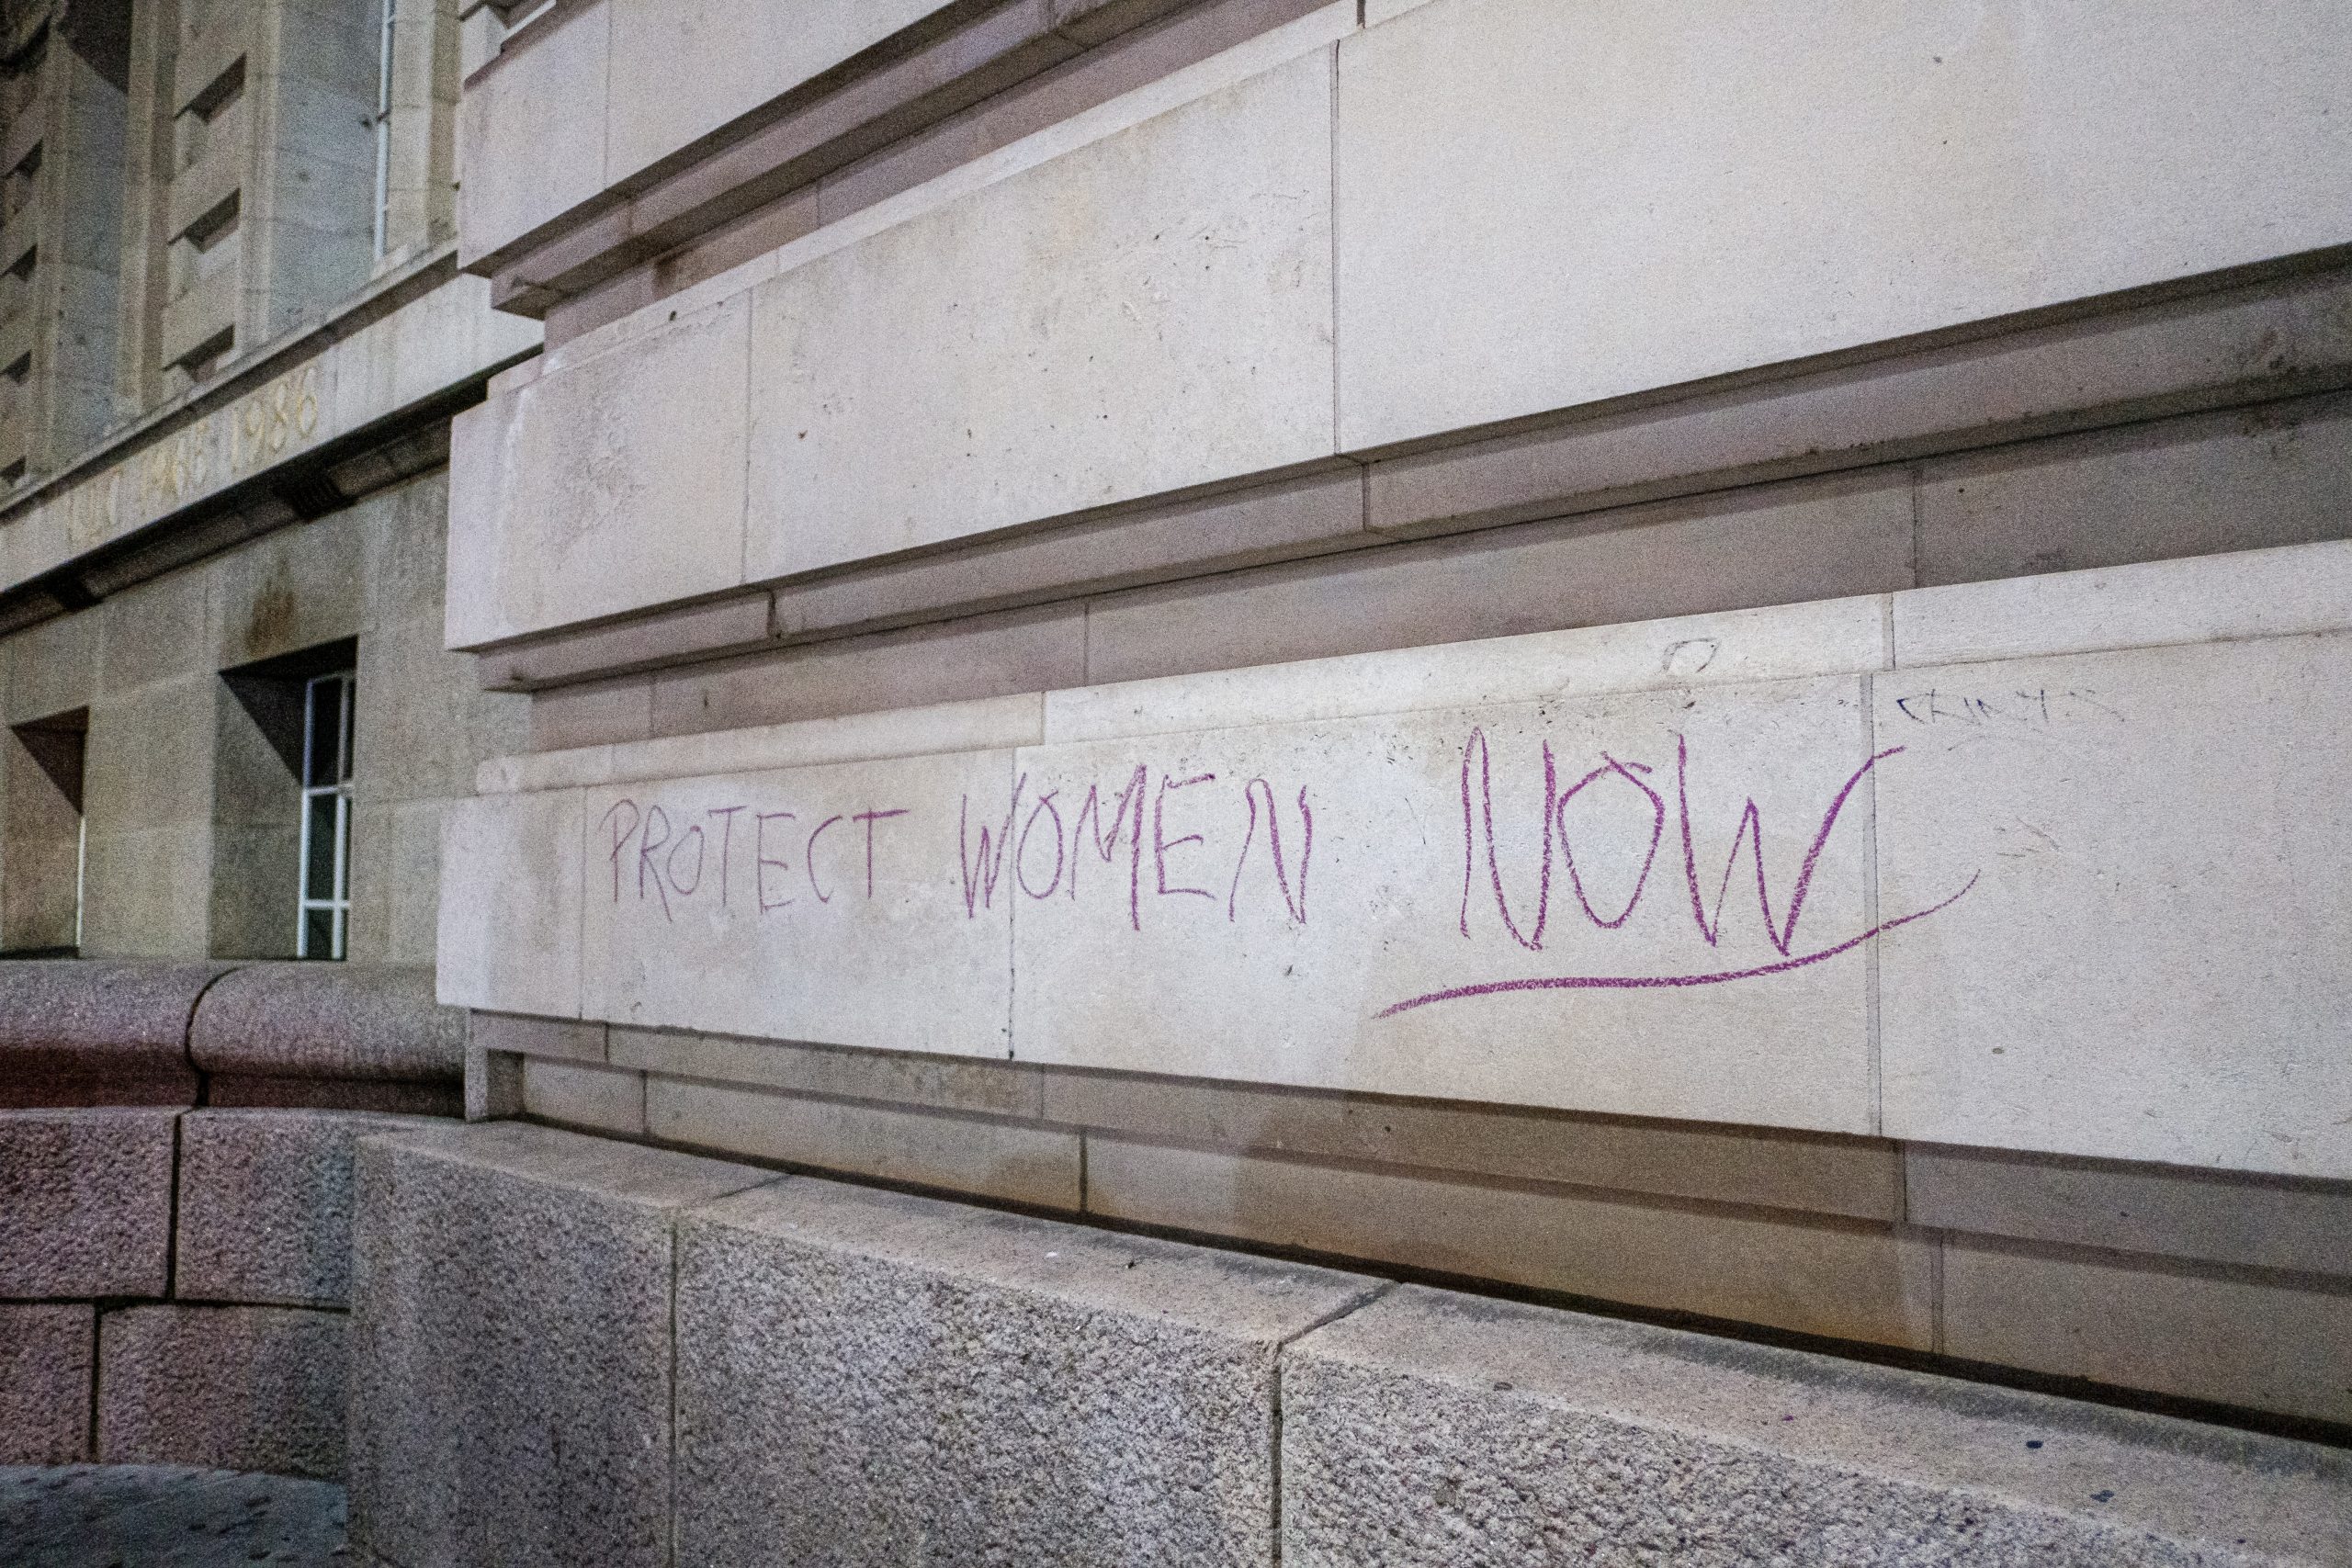 The words "protect women now" are written on a stone wall